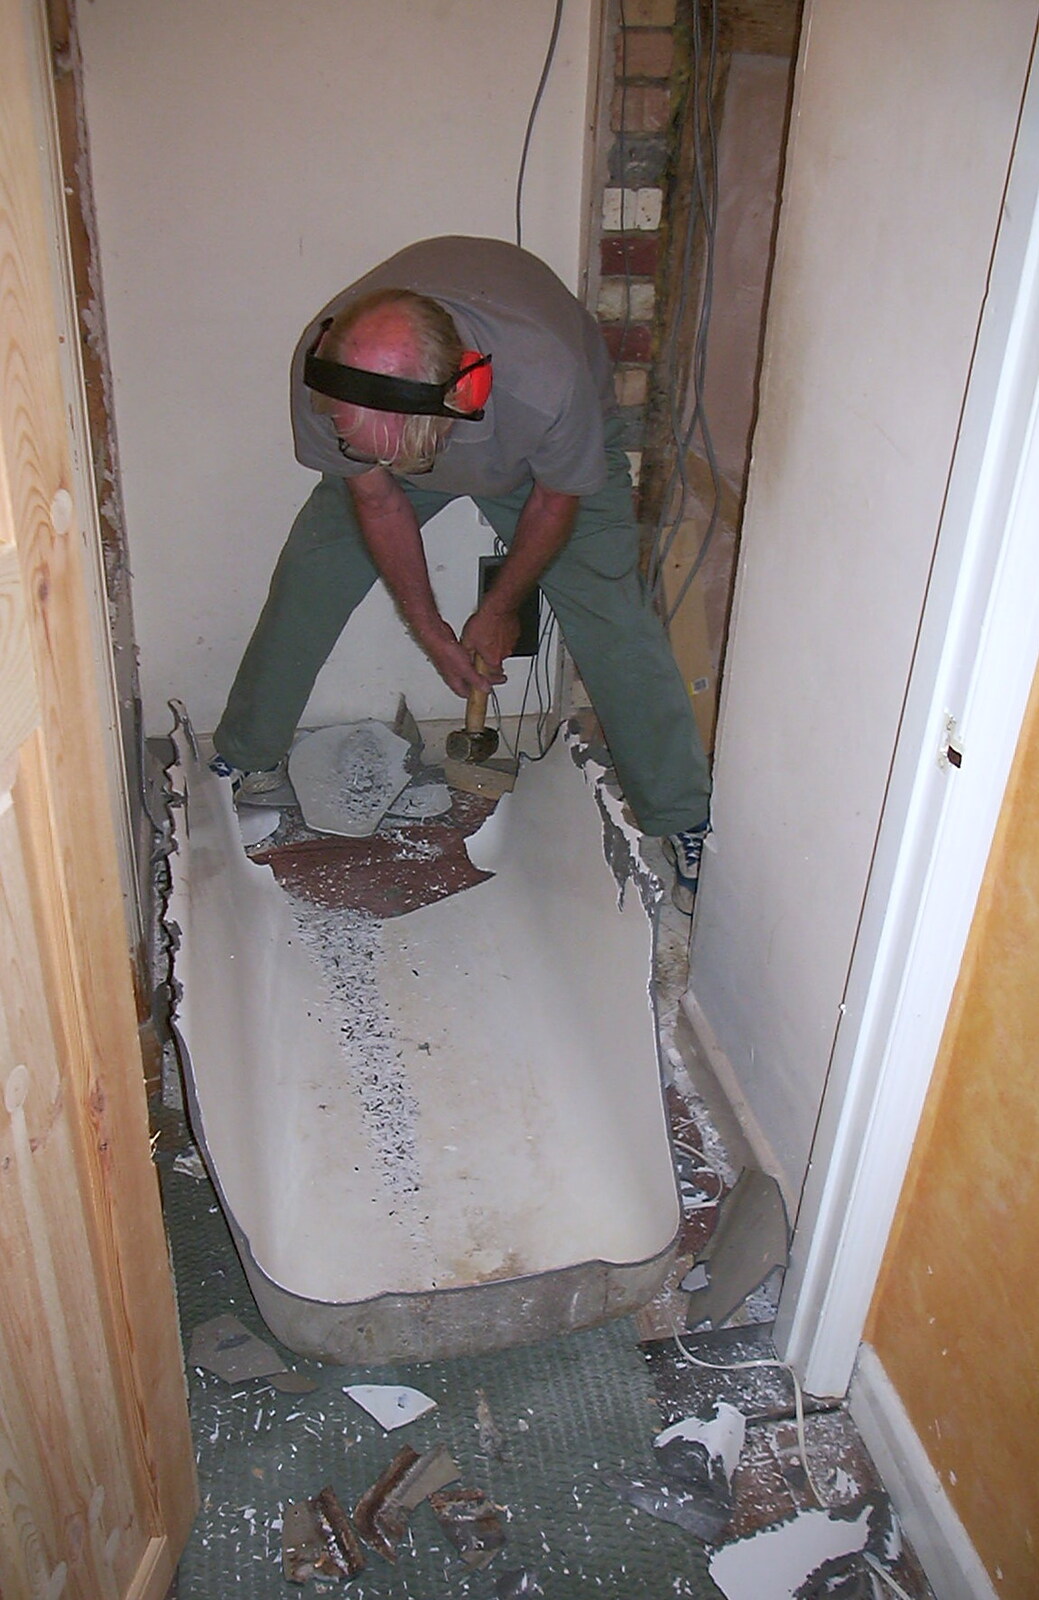 The old man helps smash up a cast iron bath from A Hard-Drive Clock and Other Projects, Brome, Suffolk - 28th June 2002